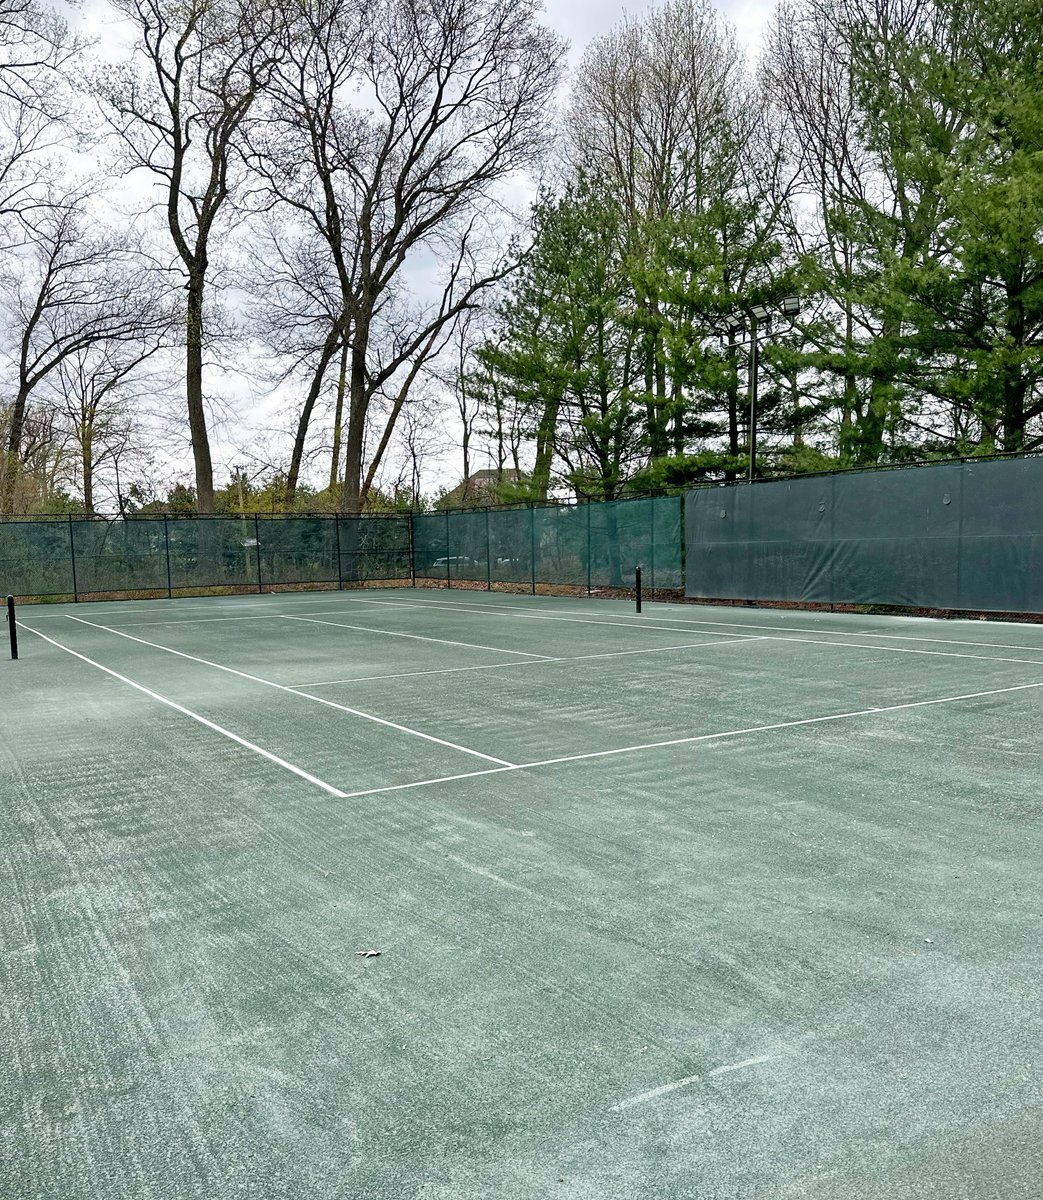 KSC's annual Har-Tru maintenance at Laurel Creek CC in Mount Laurel Twp, NJ!
We started by laser grading the clay courts to ensure a level playing surface and proper drainage. Next, our team installed new material to open up the courts for the 2024 season! 
#KSC #Keystone #Hartru